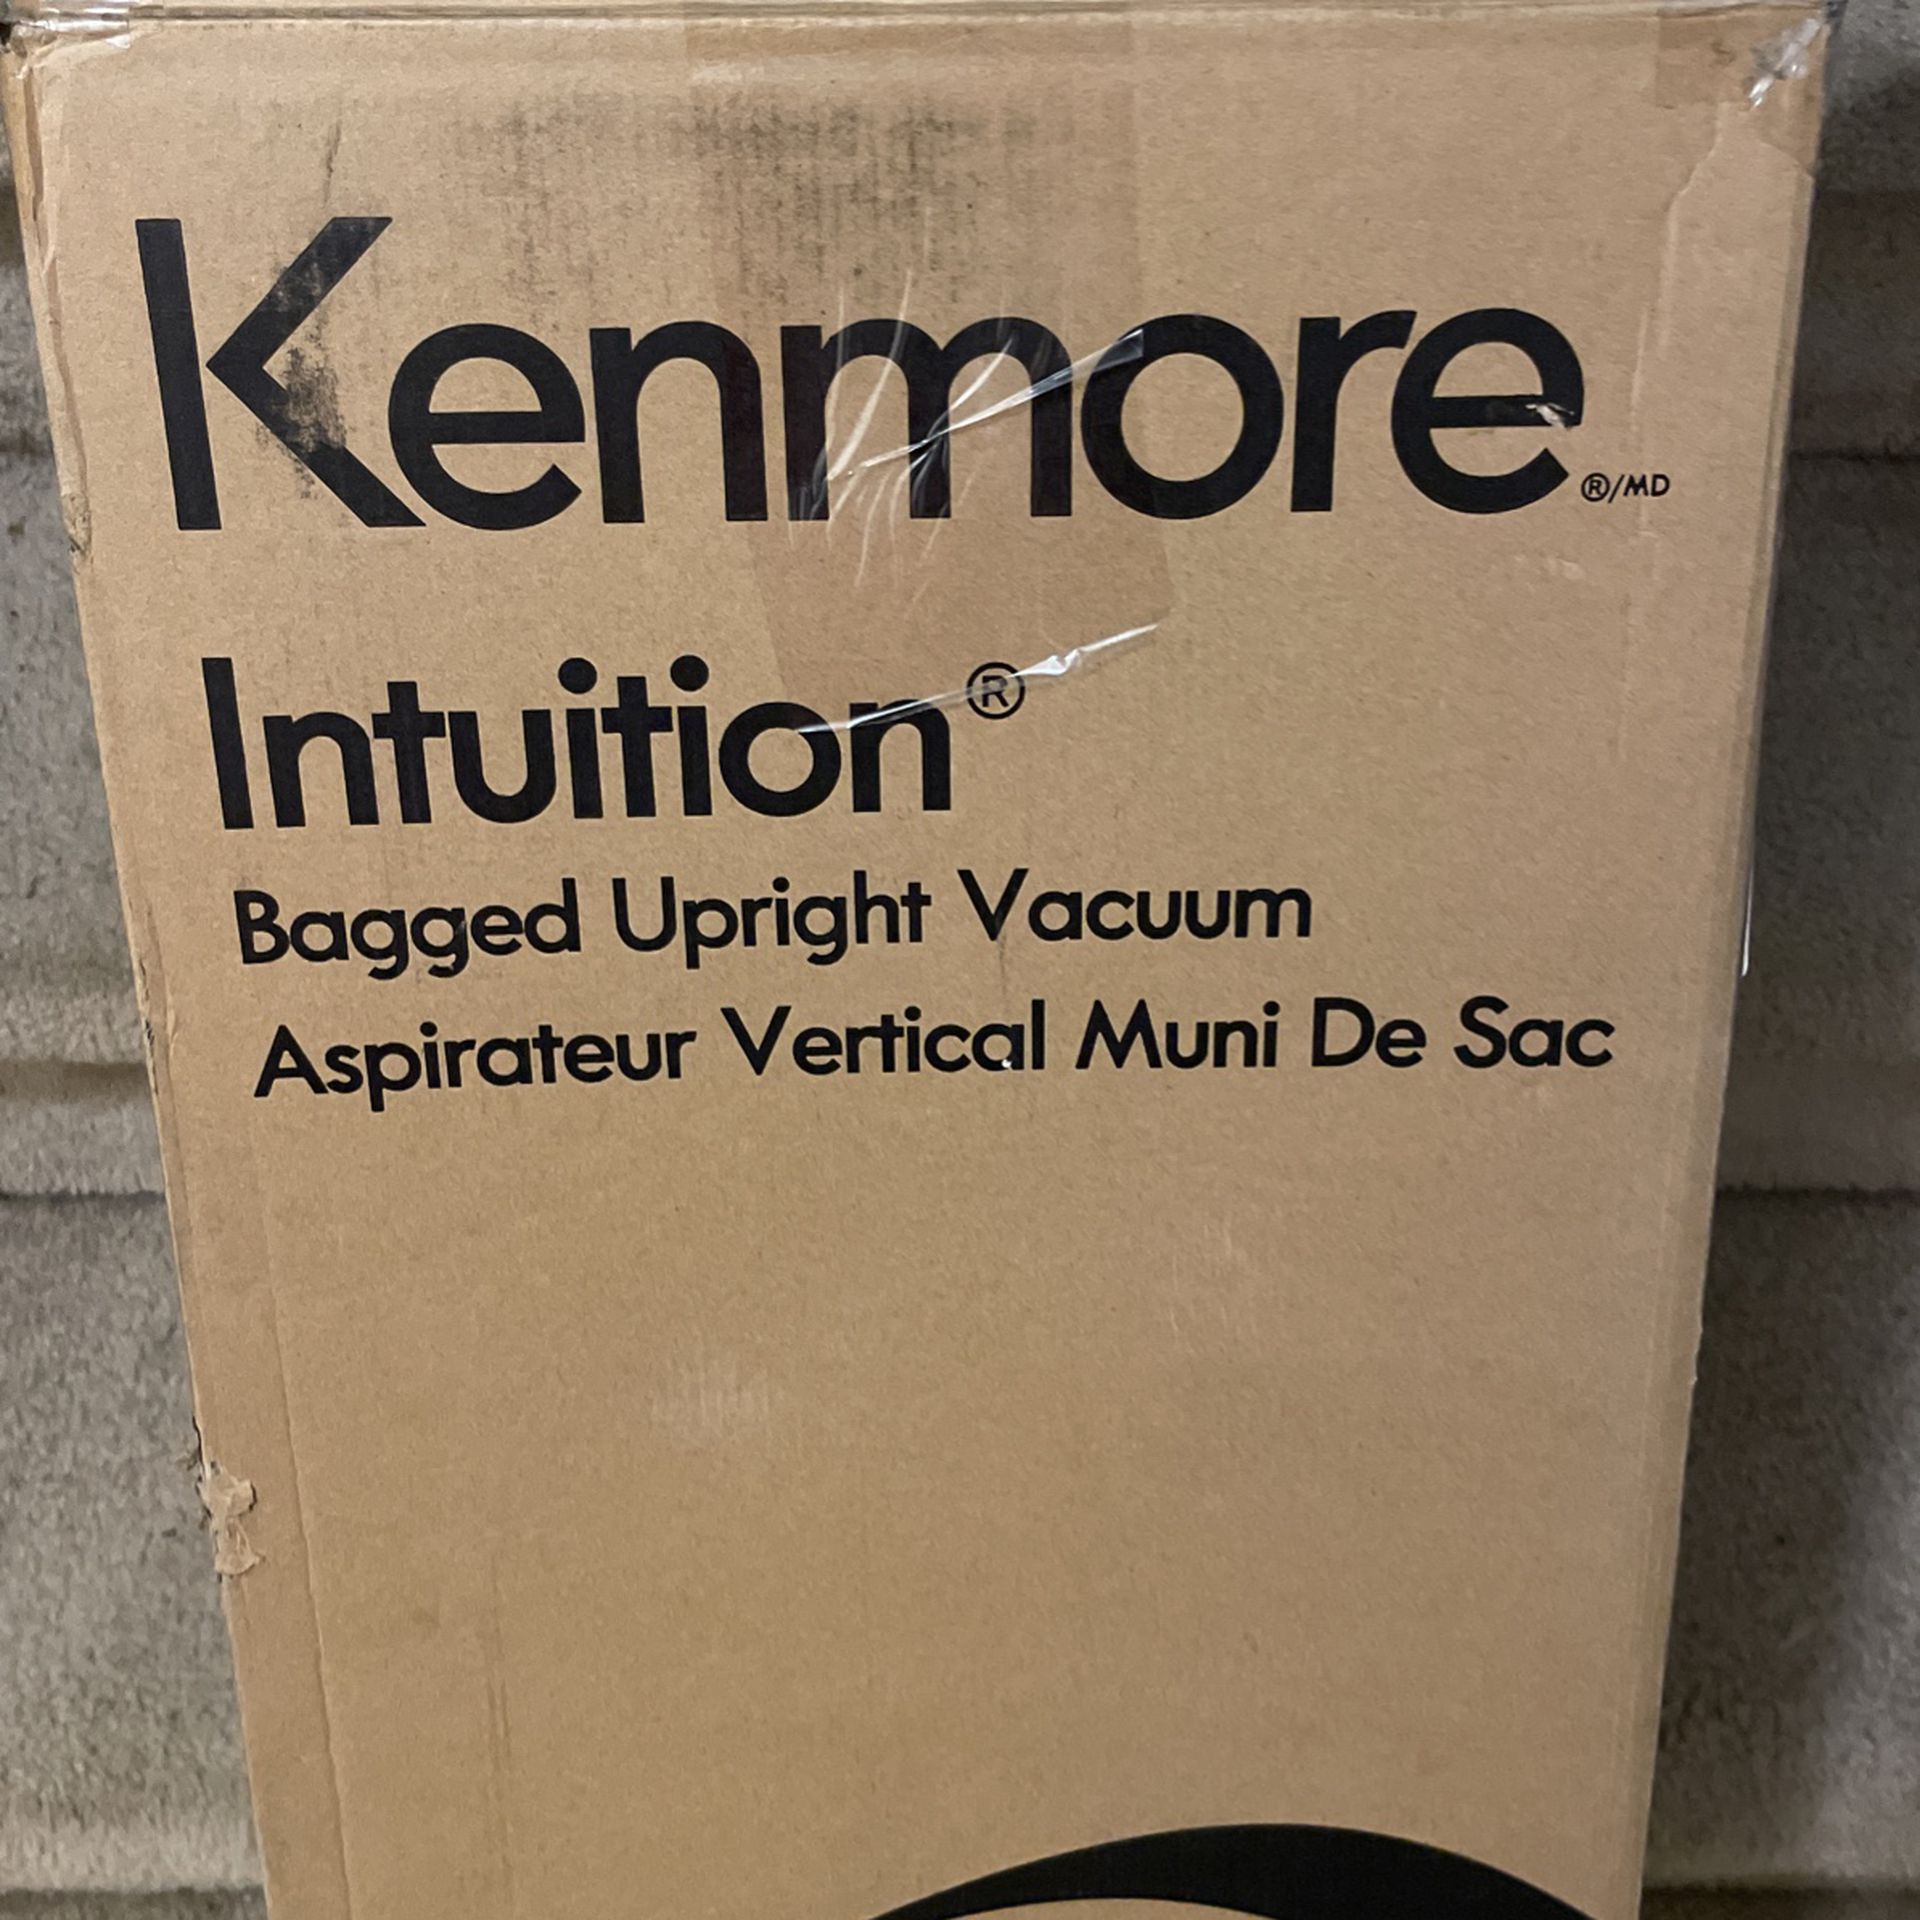 Kenmore Intuition 